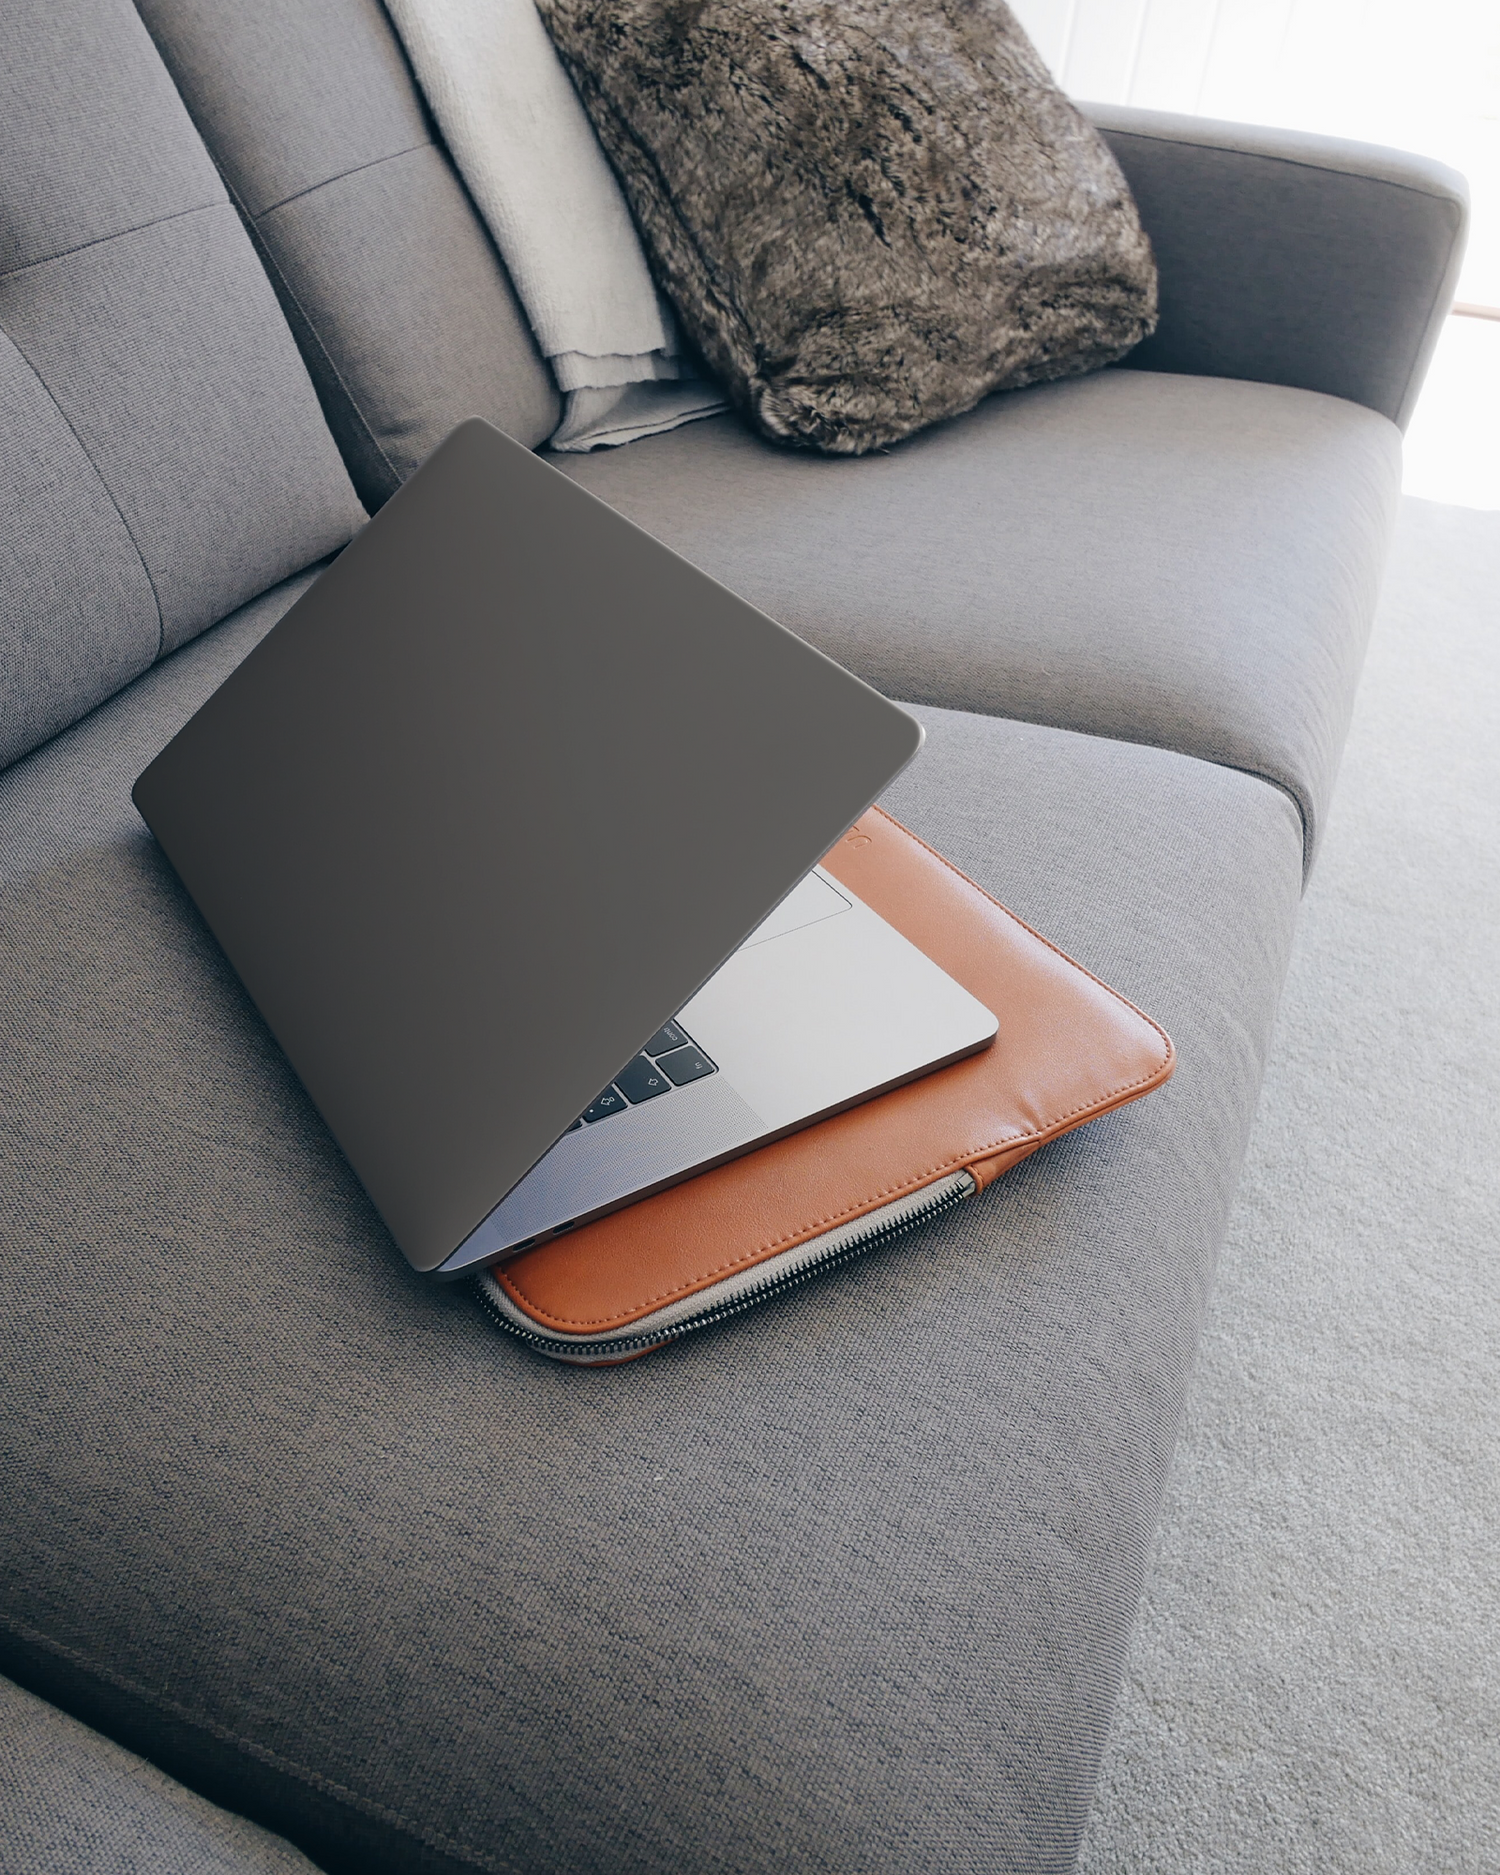 SPACE GREY Laptop Skin for 15 inch Apple MacBooks on a couch